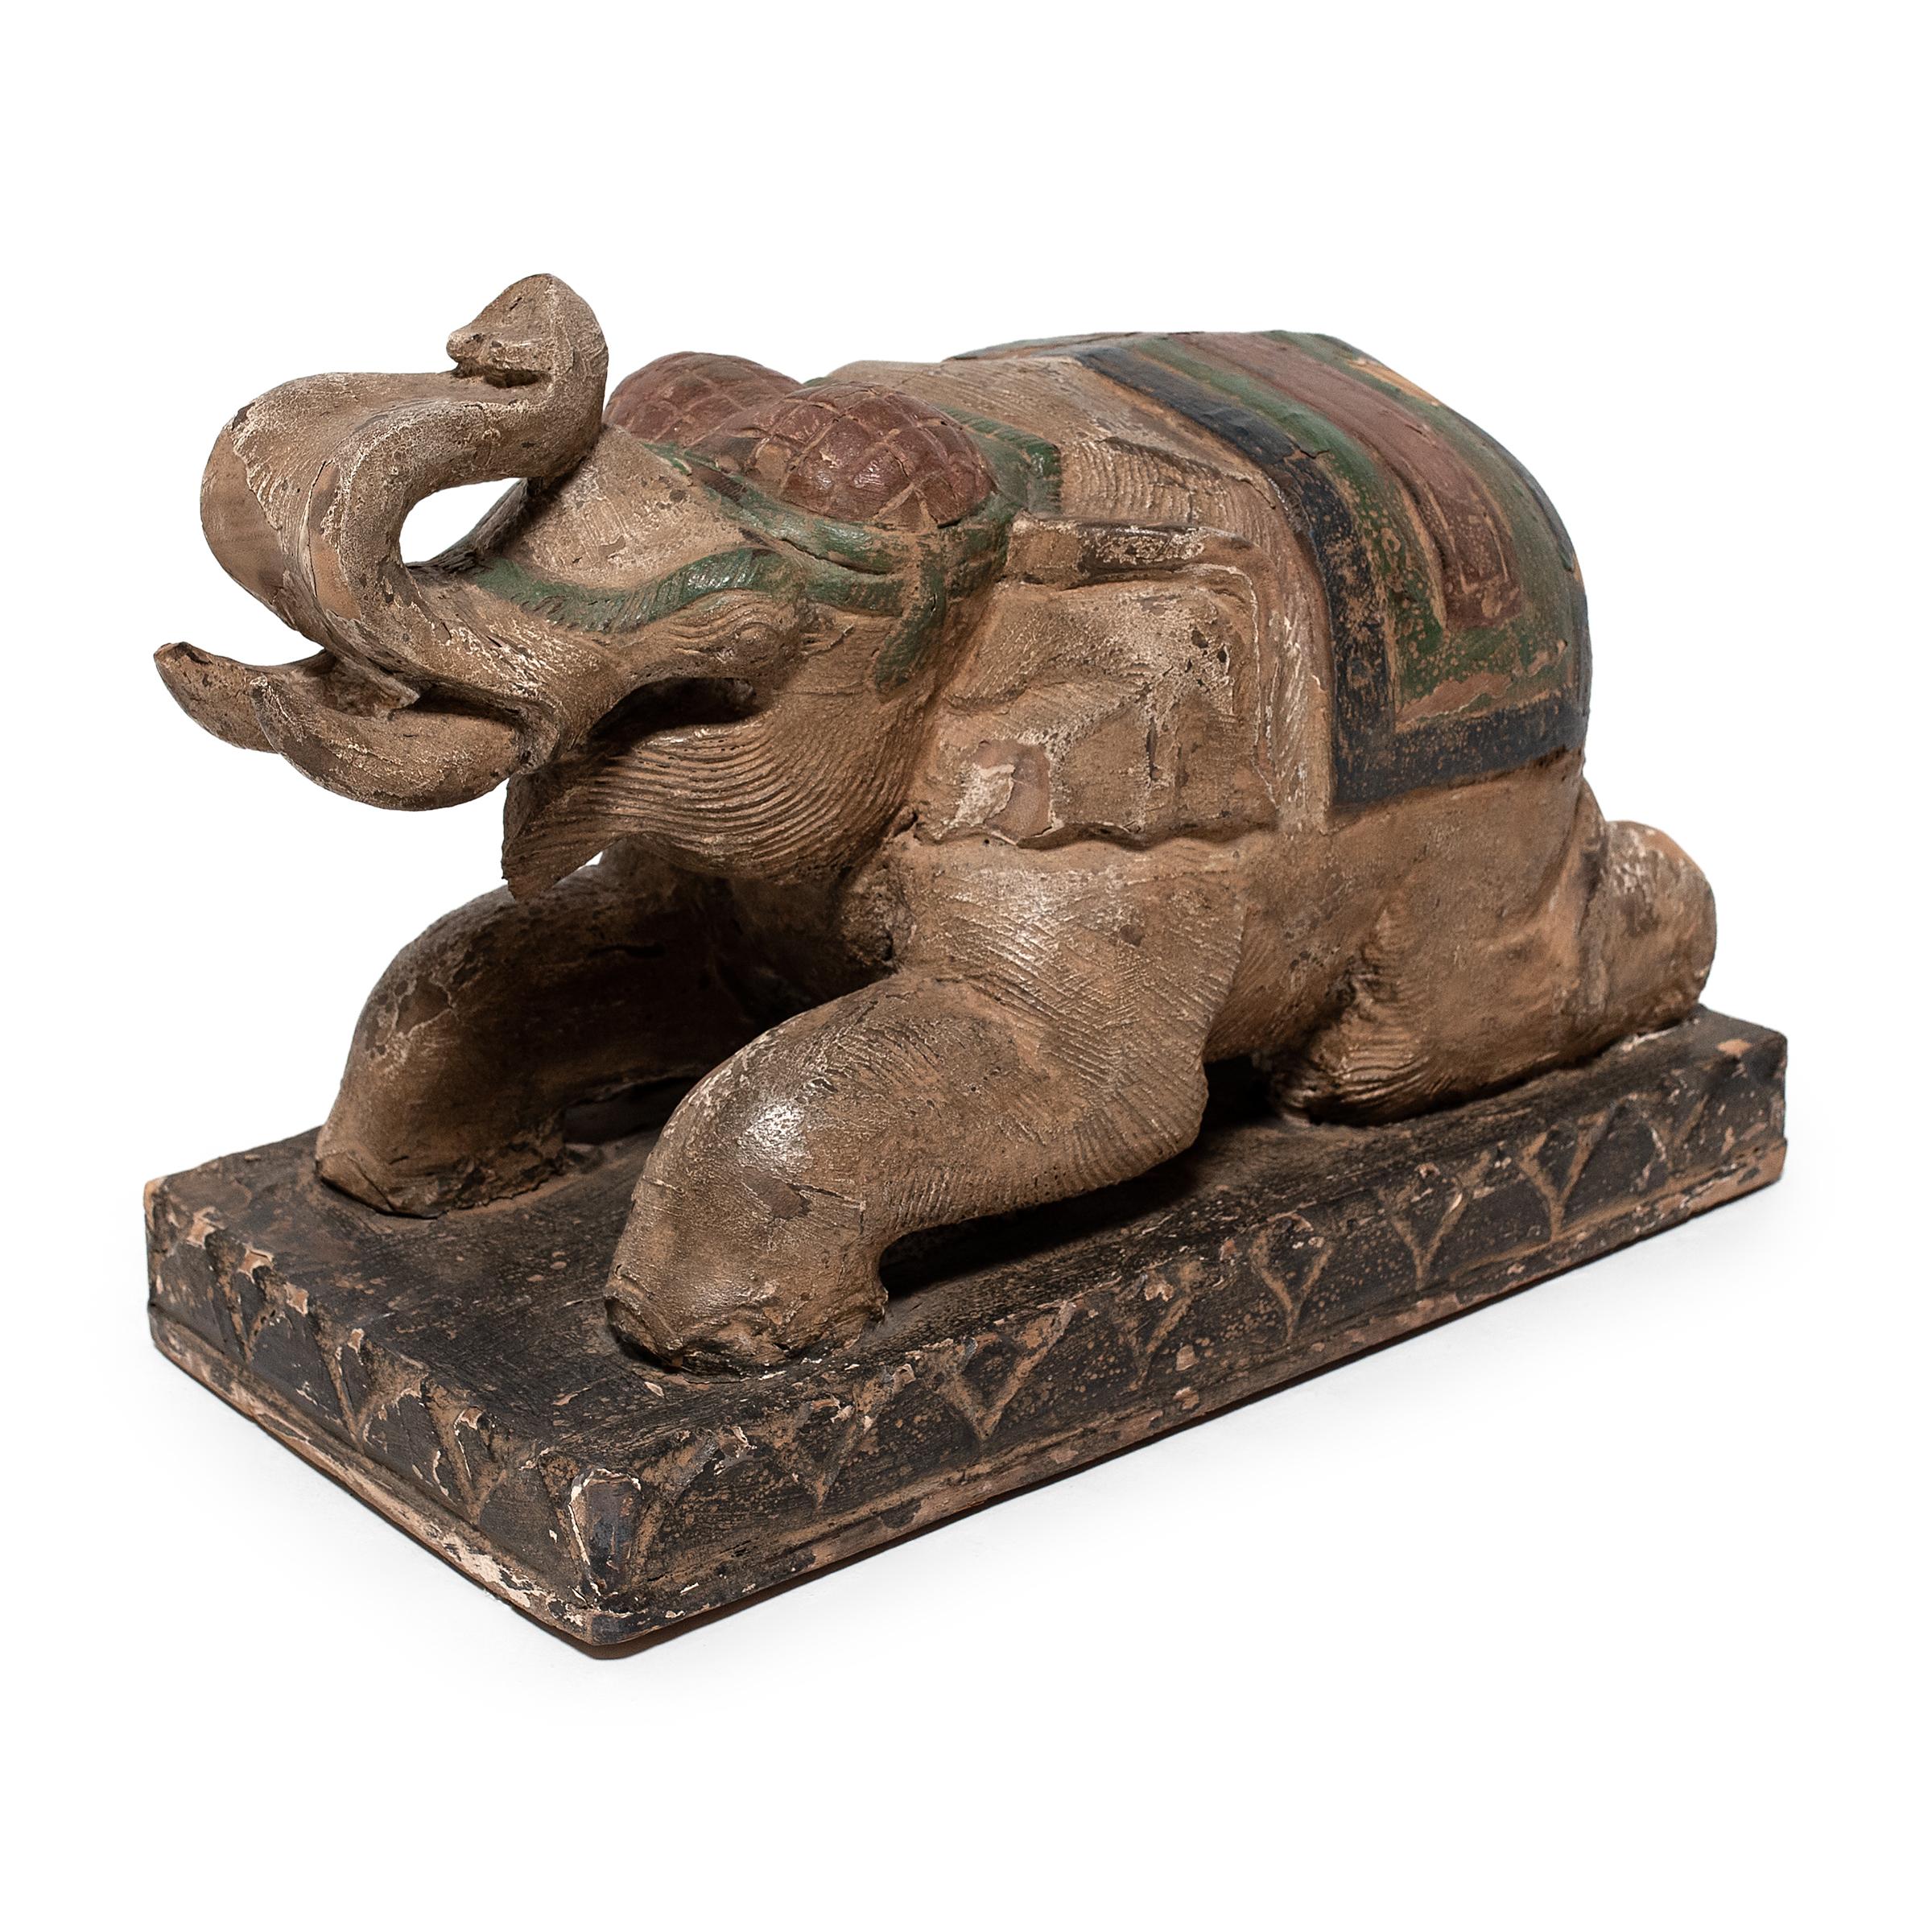 This reclining elephant was crafted in Thailand in the mid-20th century and has a carved wooden substrate with a polychrome finish. The elephant is depicted lying on its knees with its trunk in the air, a posture to allow a rider to mount its back.